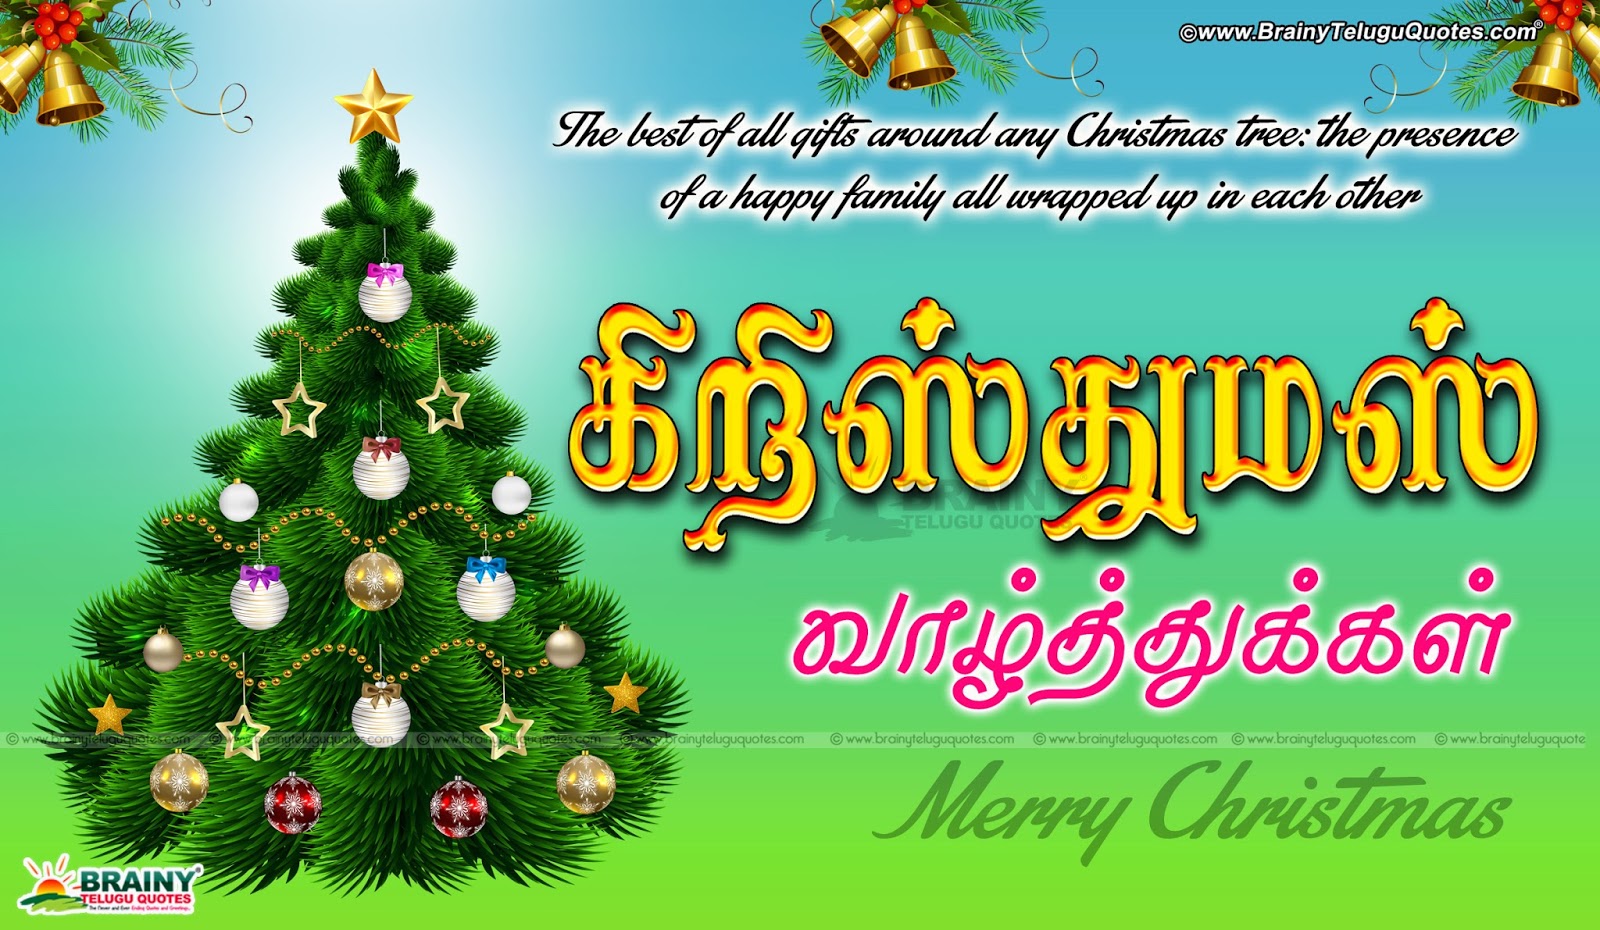 Free Tamil Christmas Quotes Greetings with Hd Wallpapers2016 Christmas